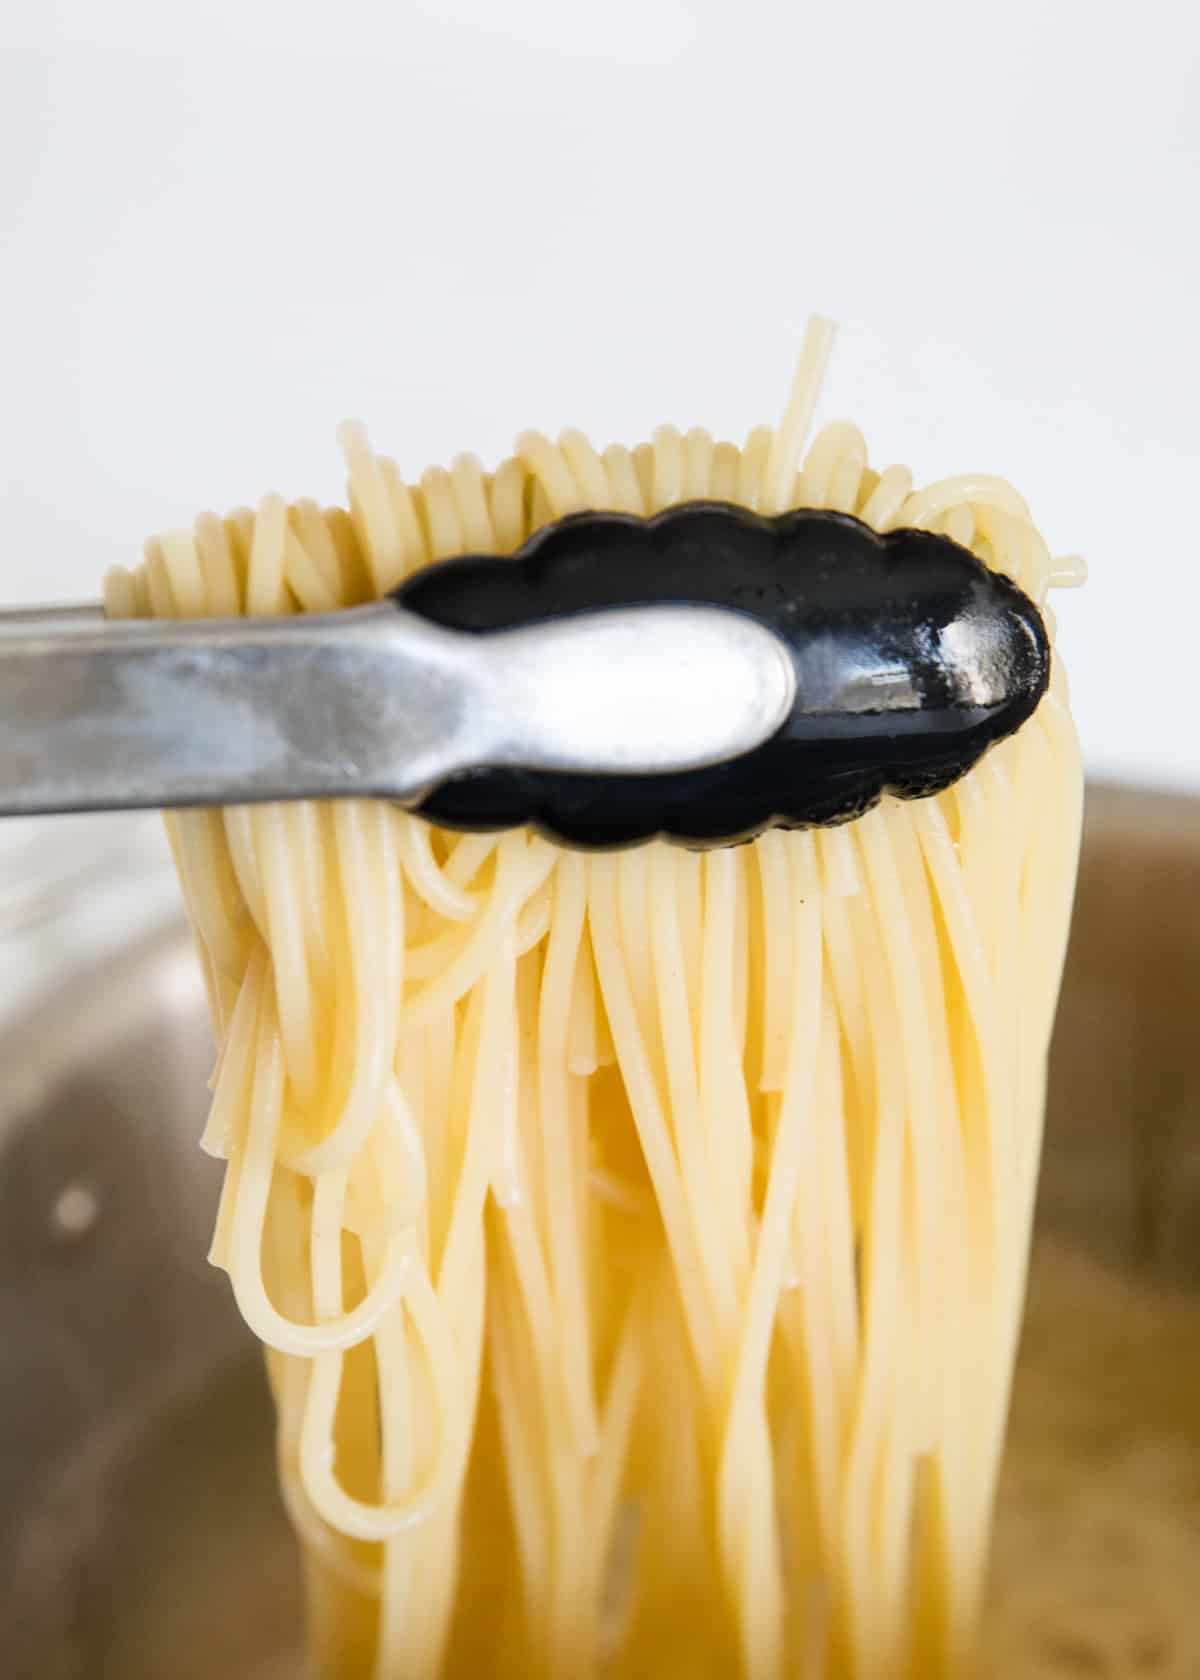 Lifting pasta out of the pot with tongs.